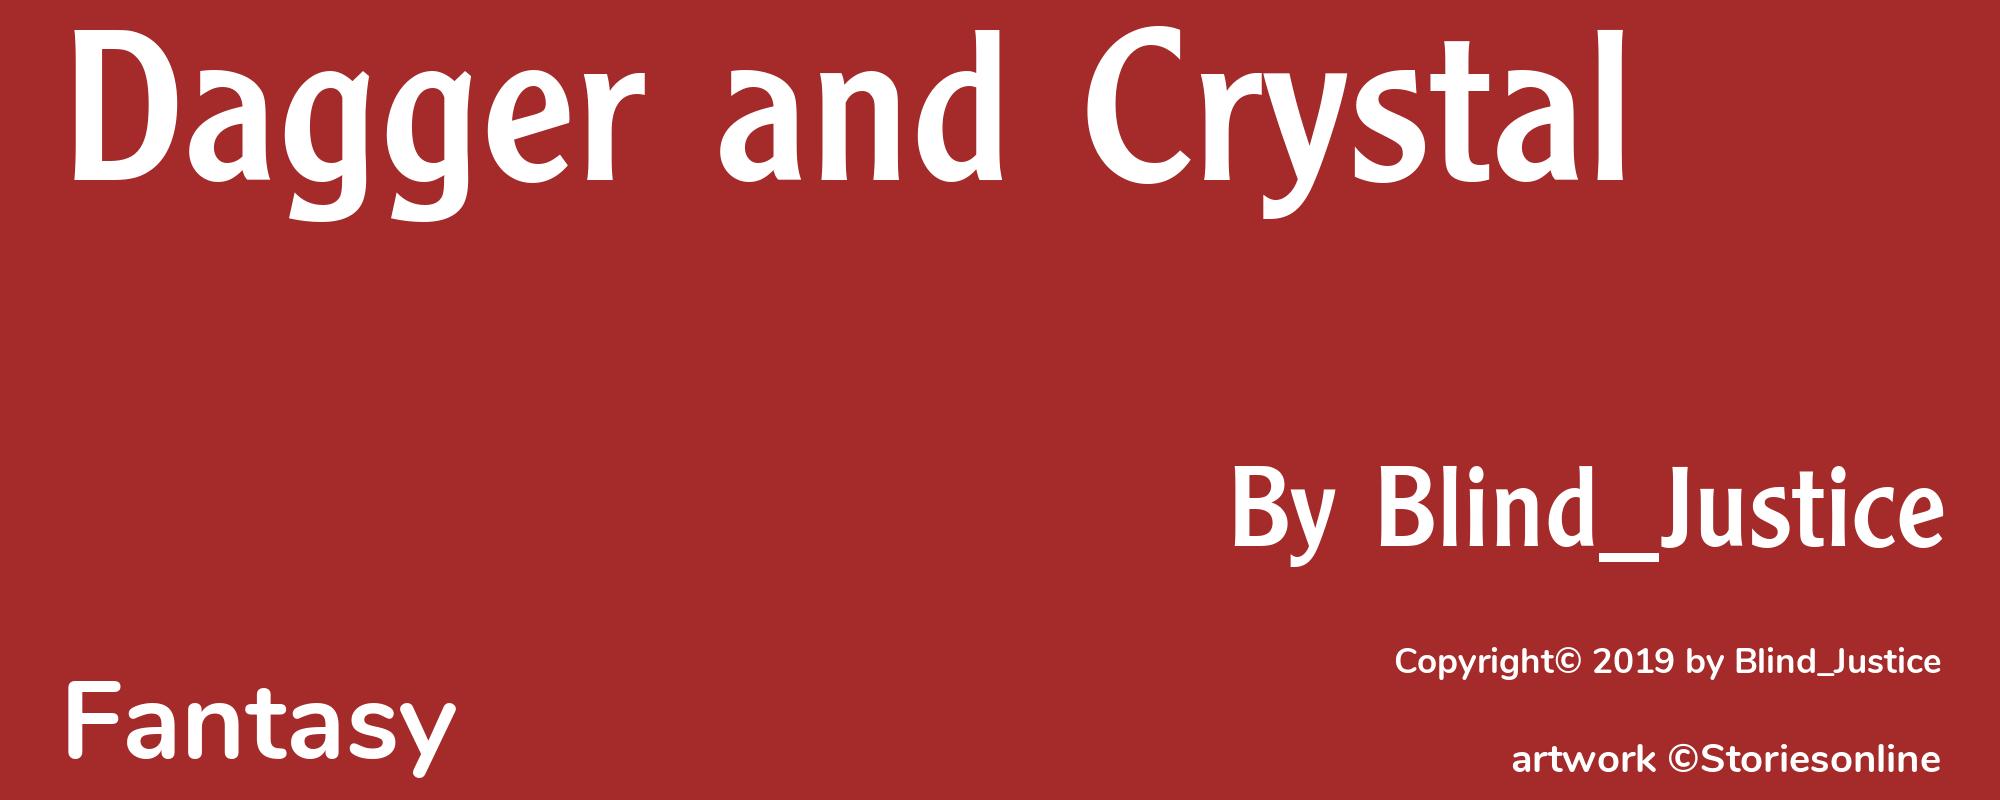 Dagger and Crystal - Cover